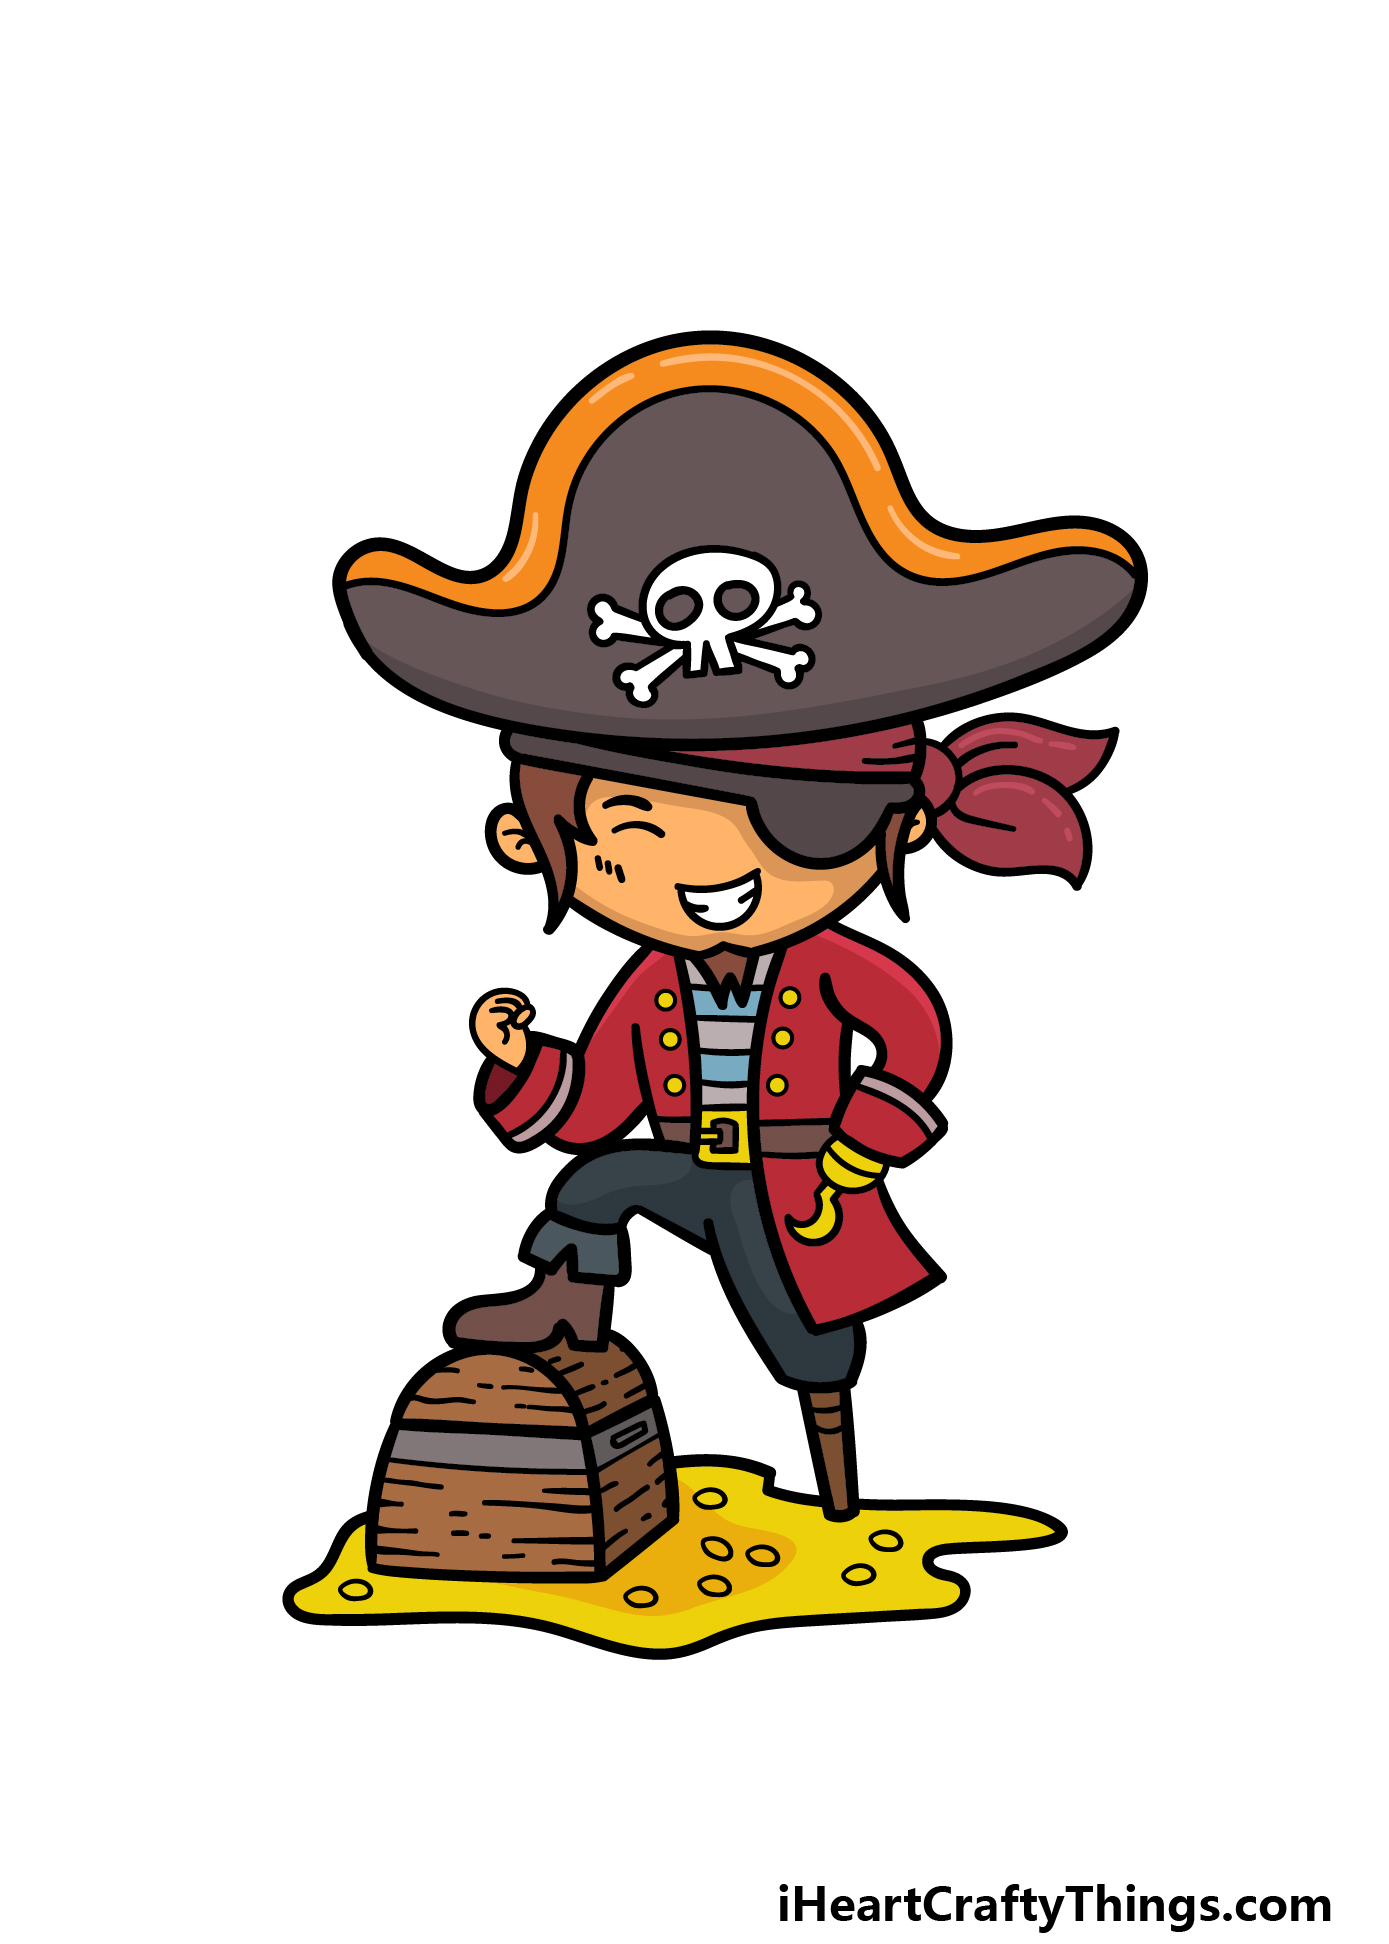 Cartoon Pirate Drawing - How To Draw A Cartoon Pirate Step By Step